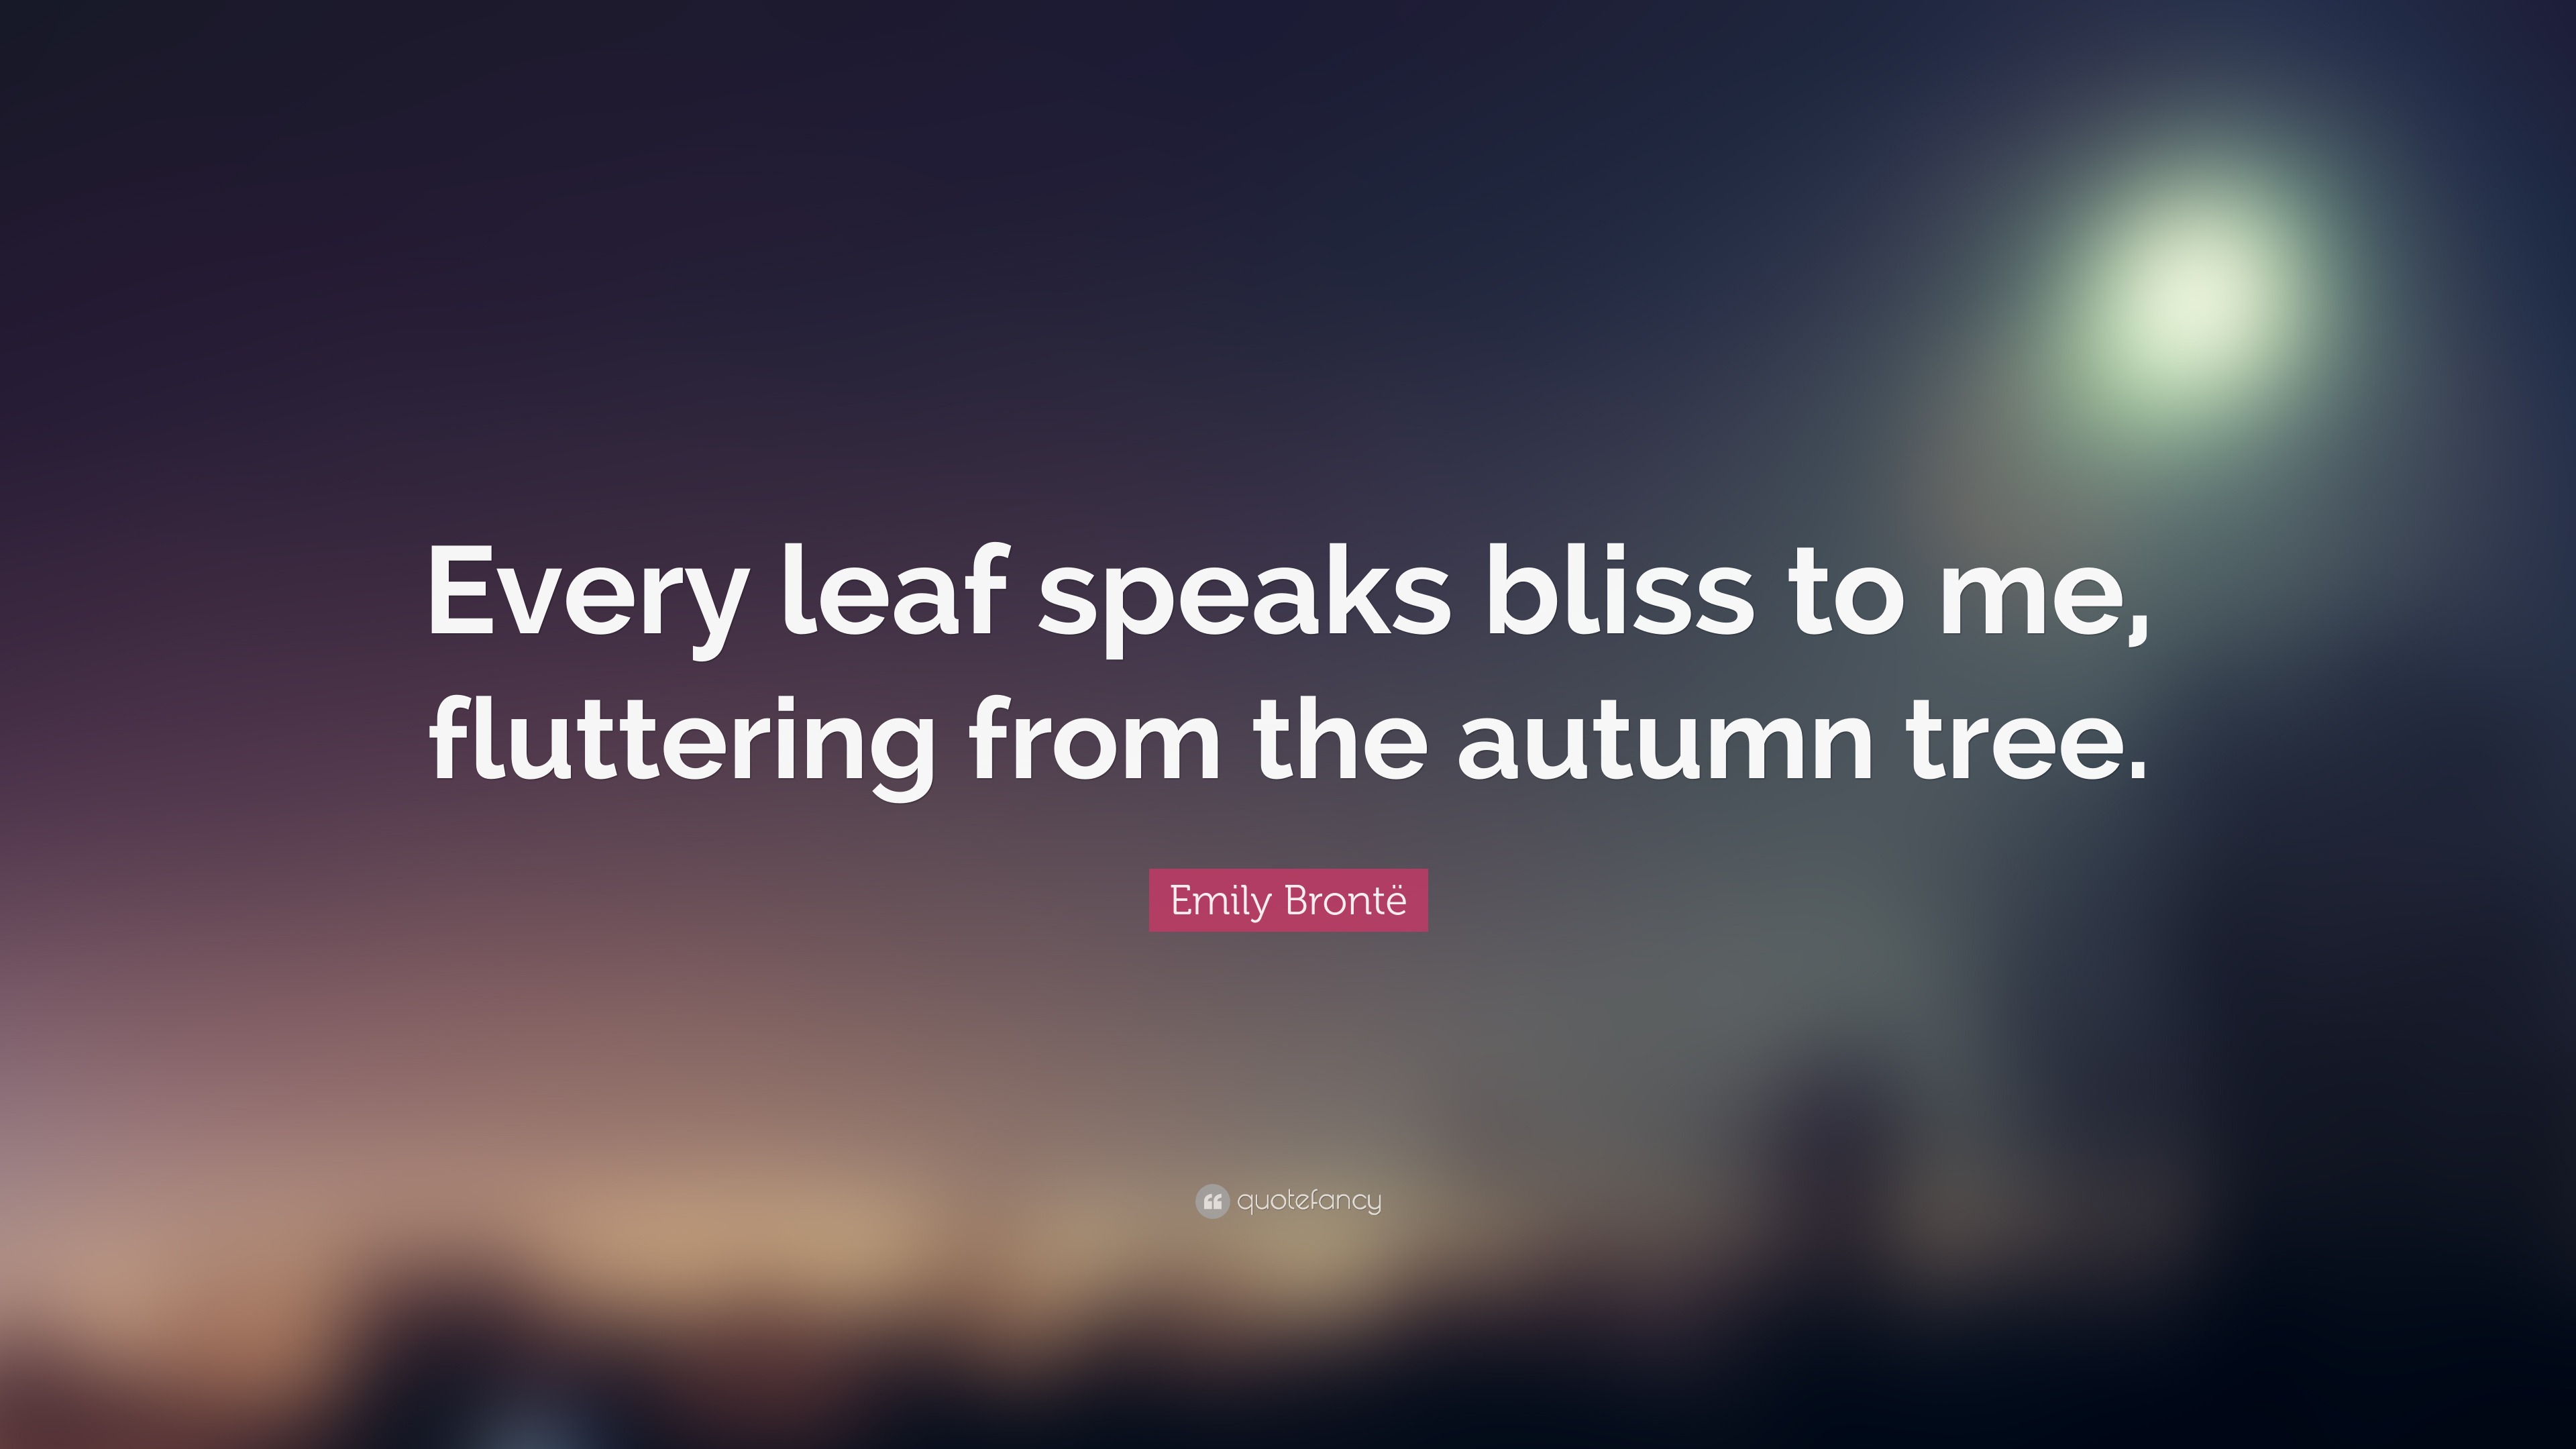 Emily Brontë Quote: “Every leaf speaks bliss to me, fluttering from the ...